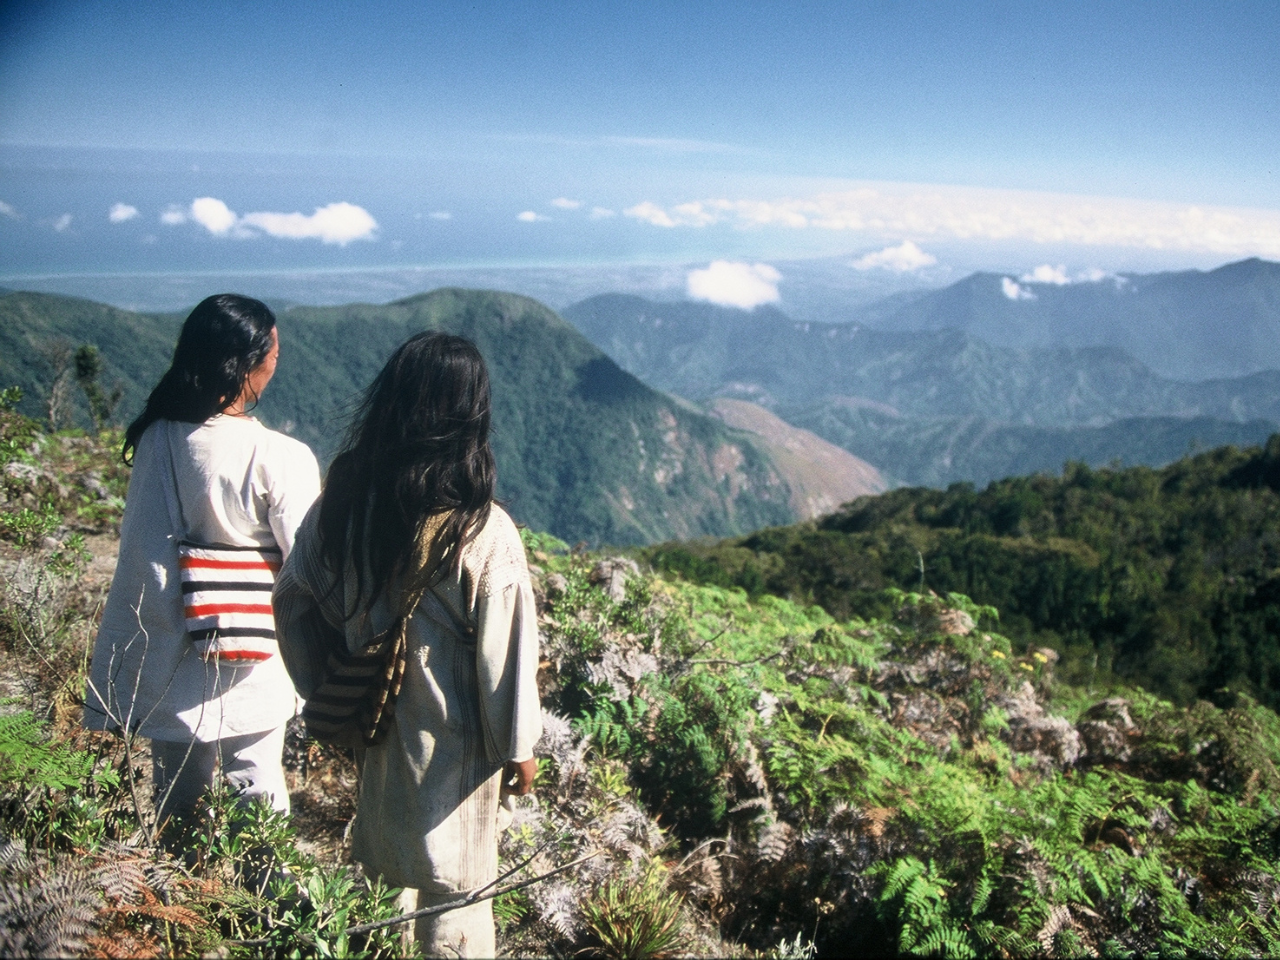 Two Kogi Indians looking at the mountains.